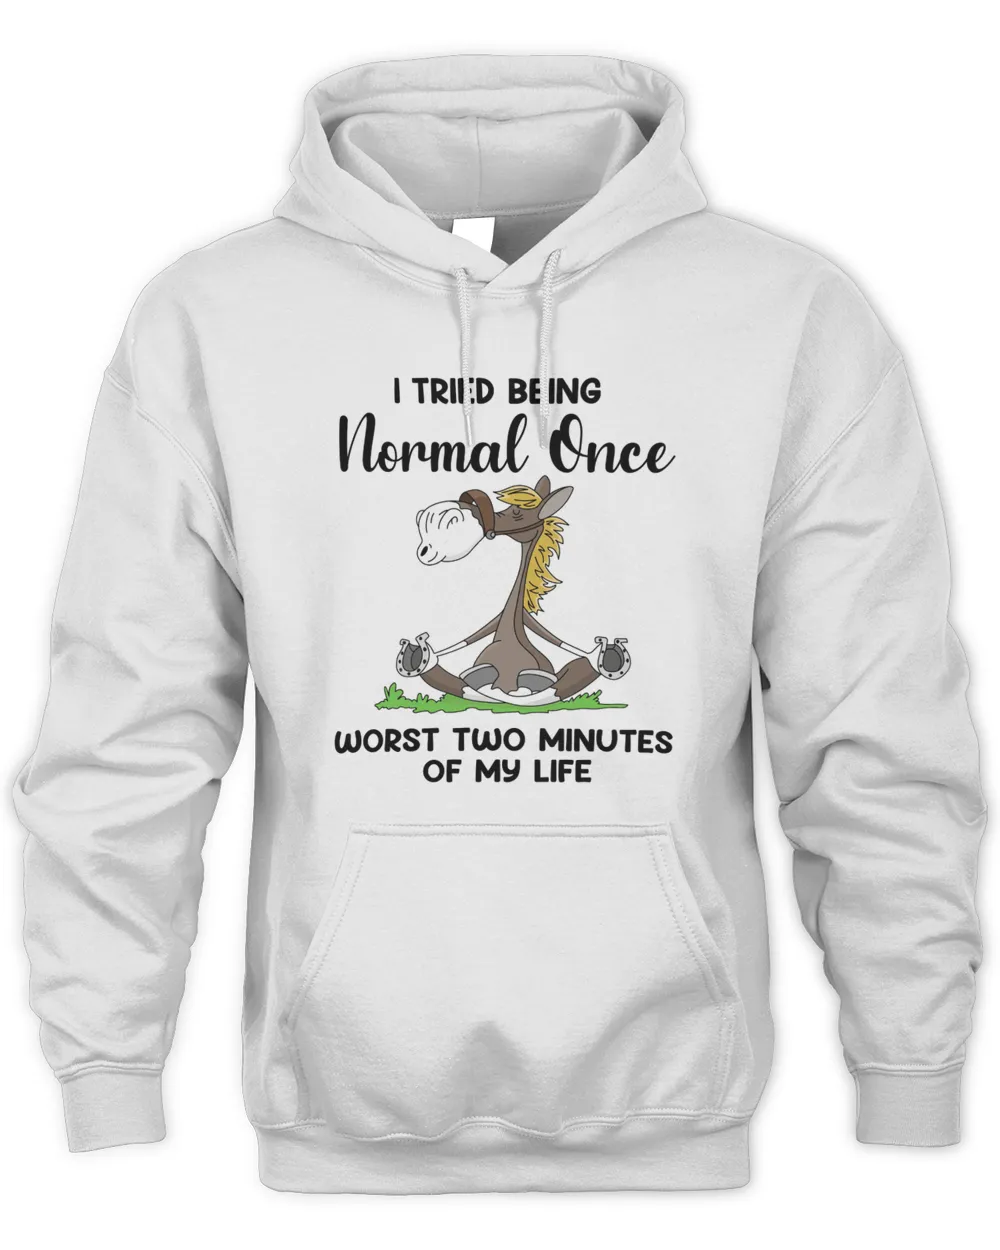 I tried being normal once funny horse gift